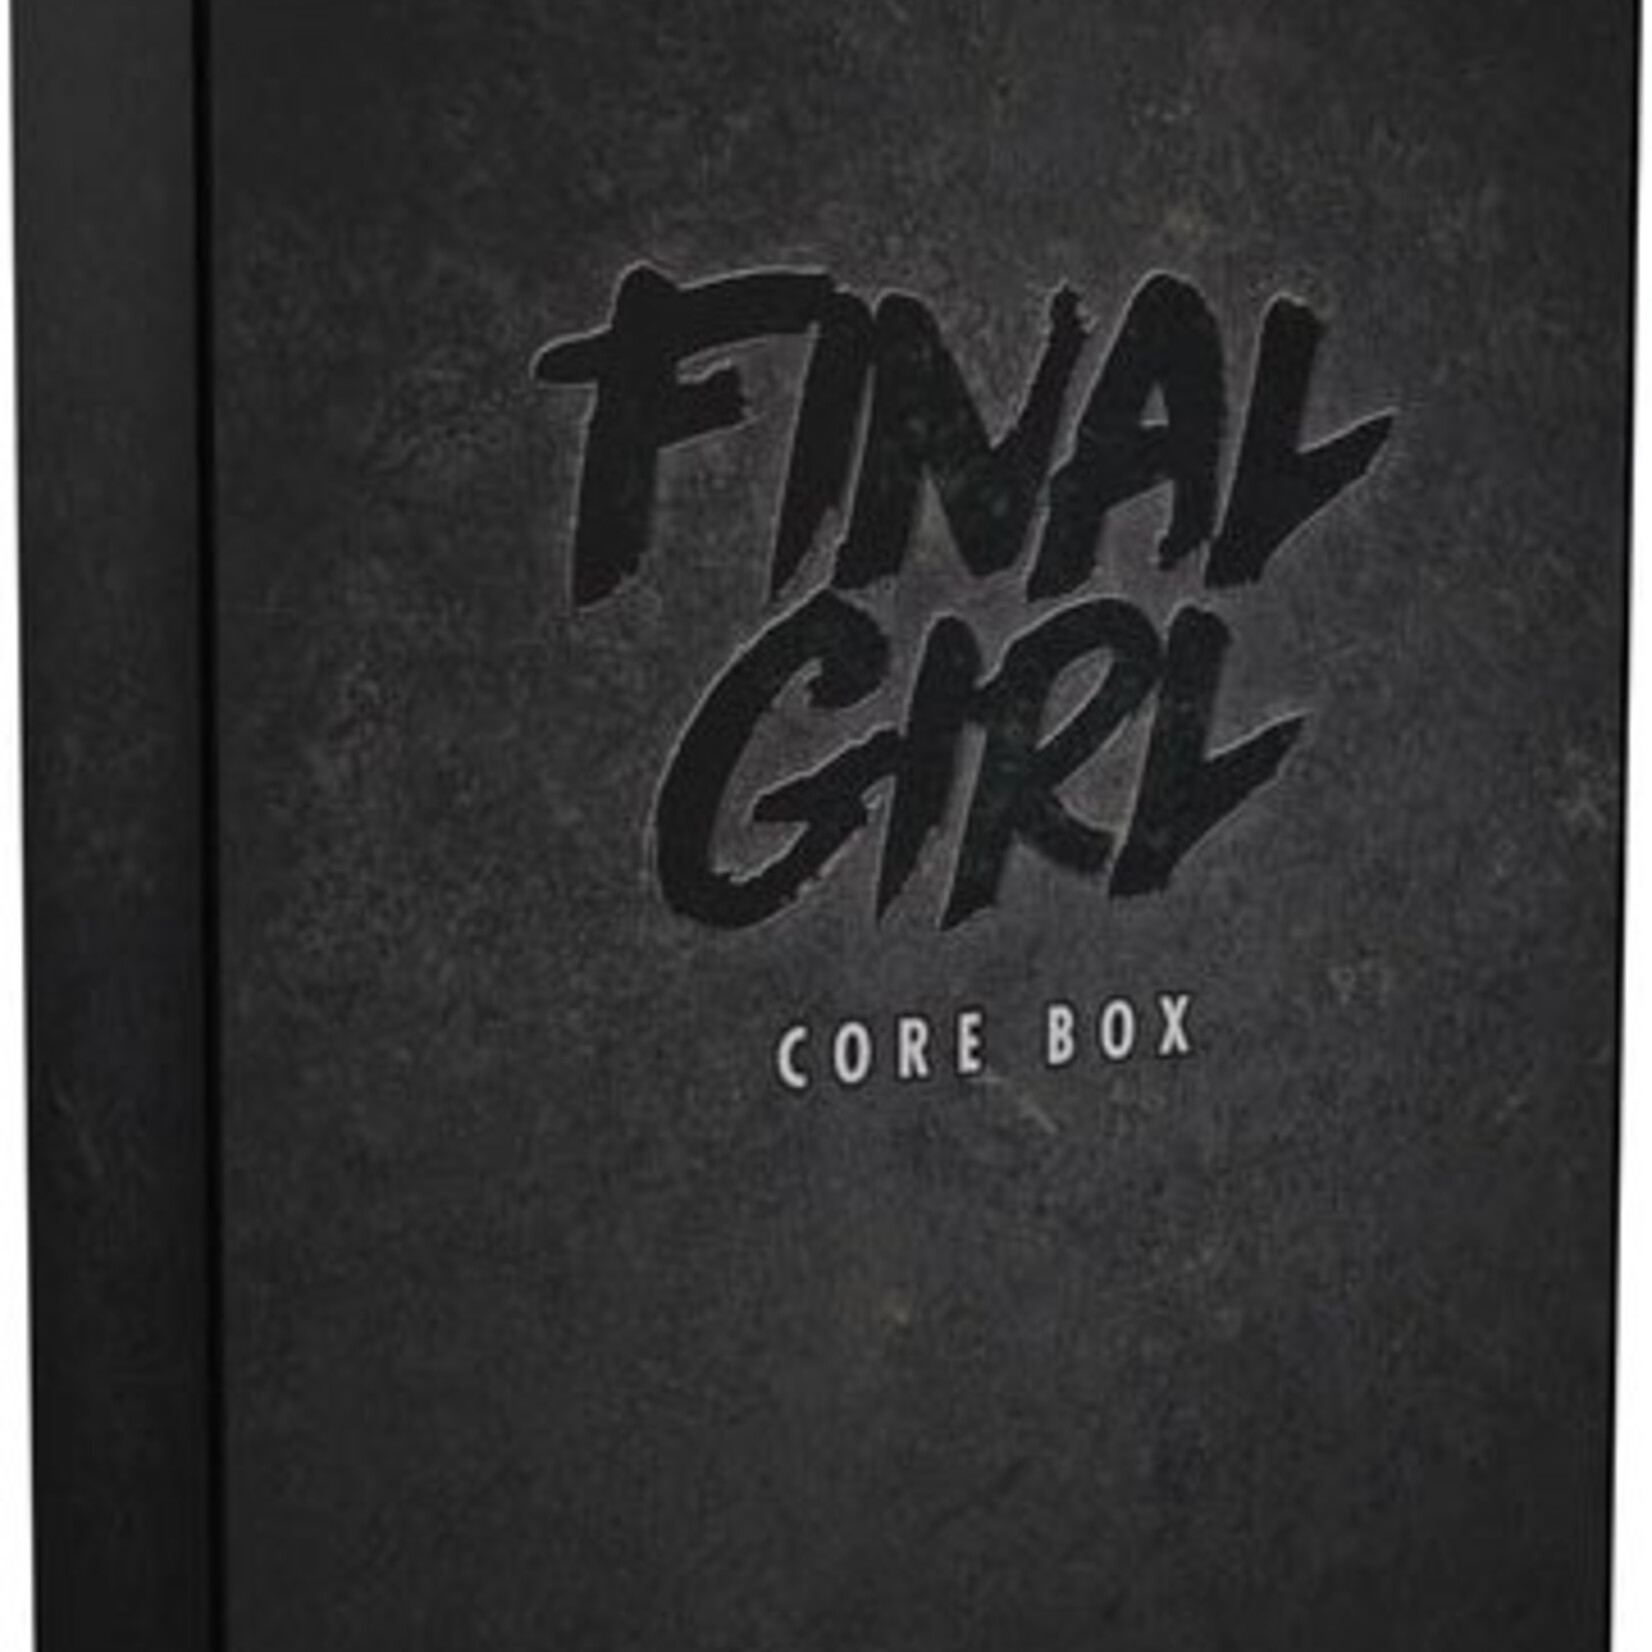 Van Ryder Games Final Girl: Core Box (Requires Expansion to Play)